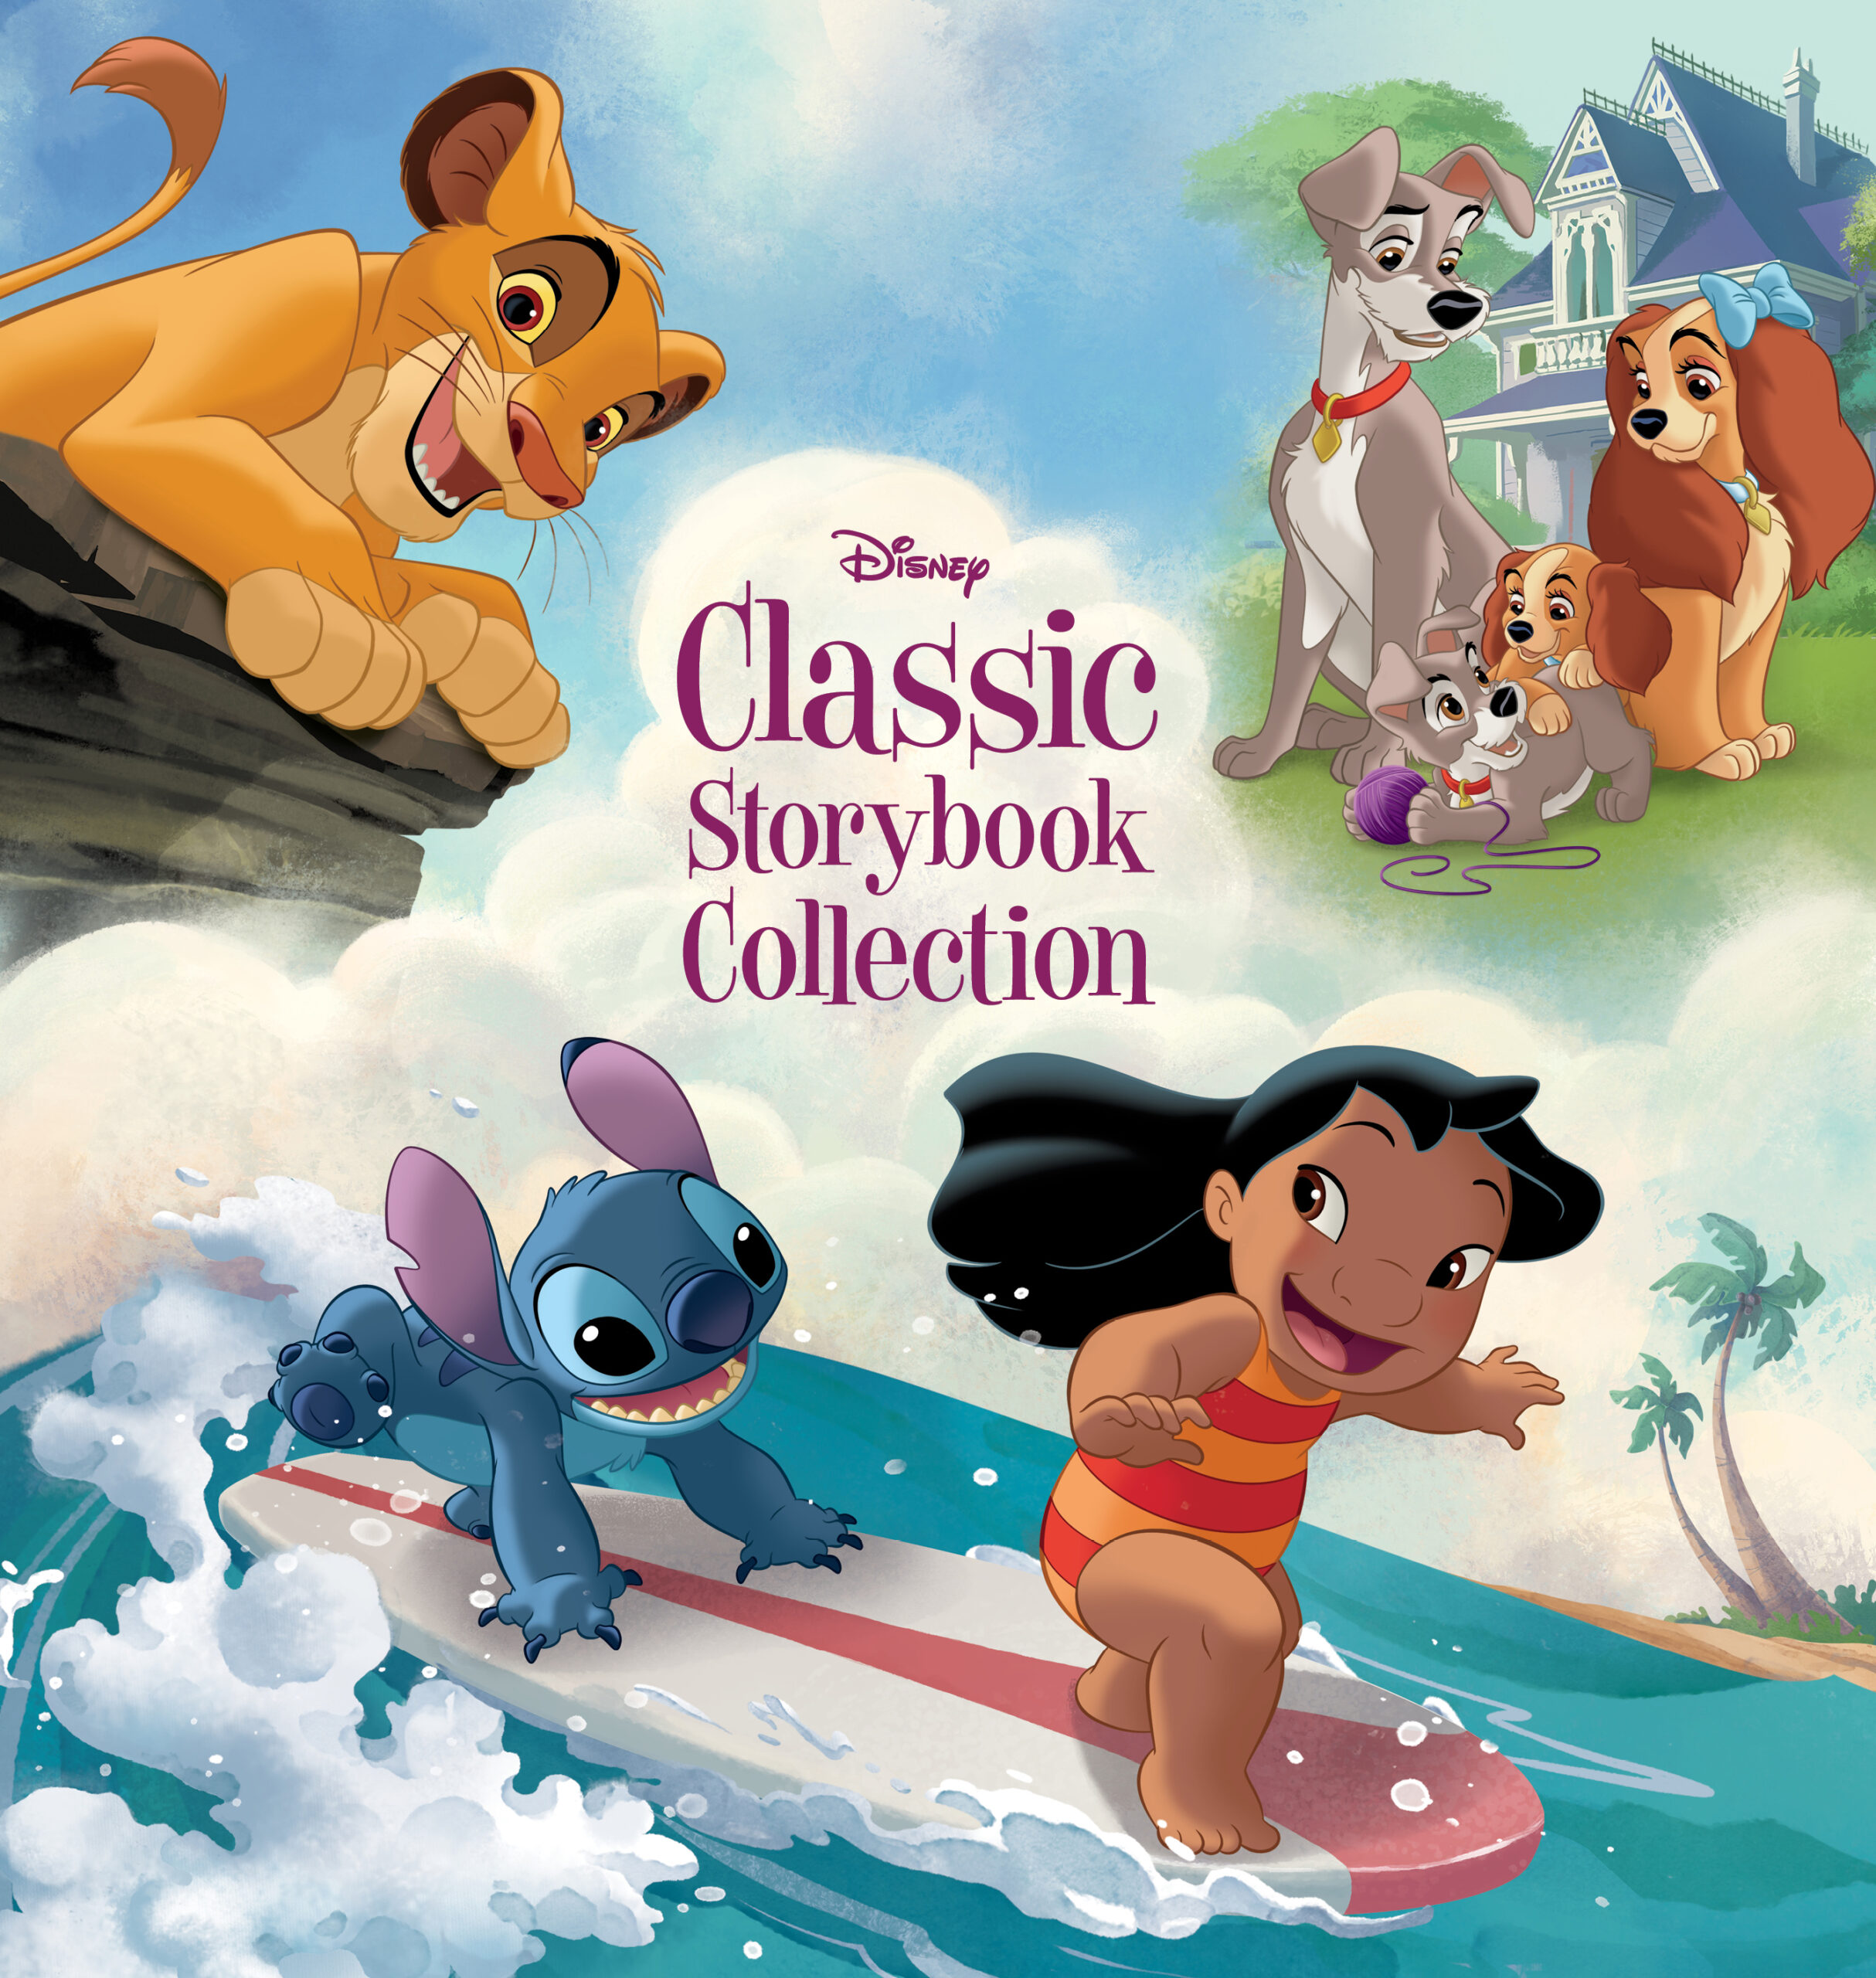 Classic Storybook Collection by Disney Books Disney Storybook Art Team - Disney Books